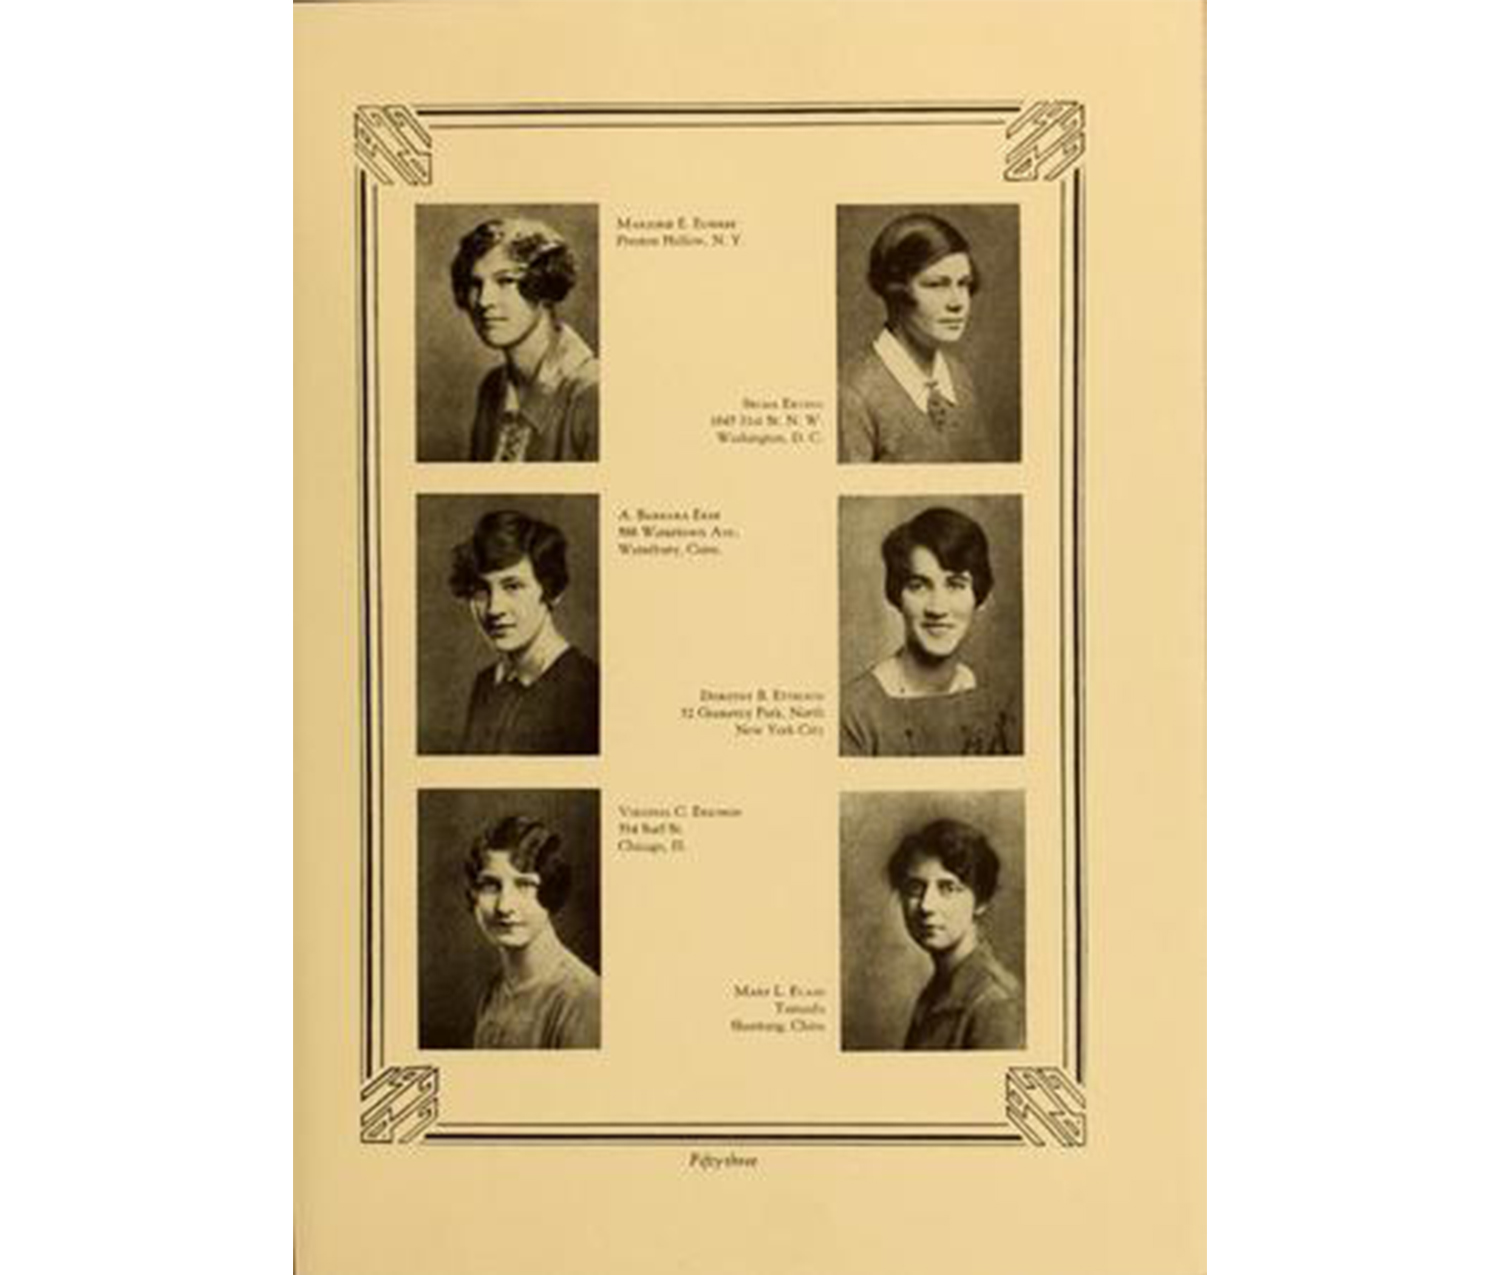 yearbook page showing bust portraits of six women